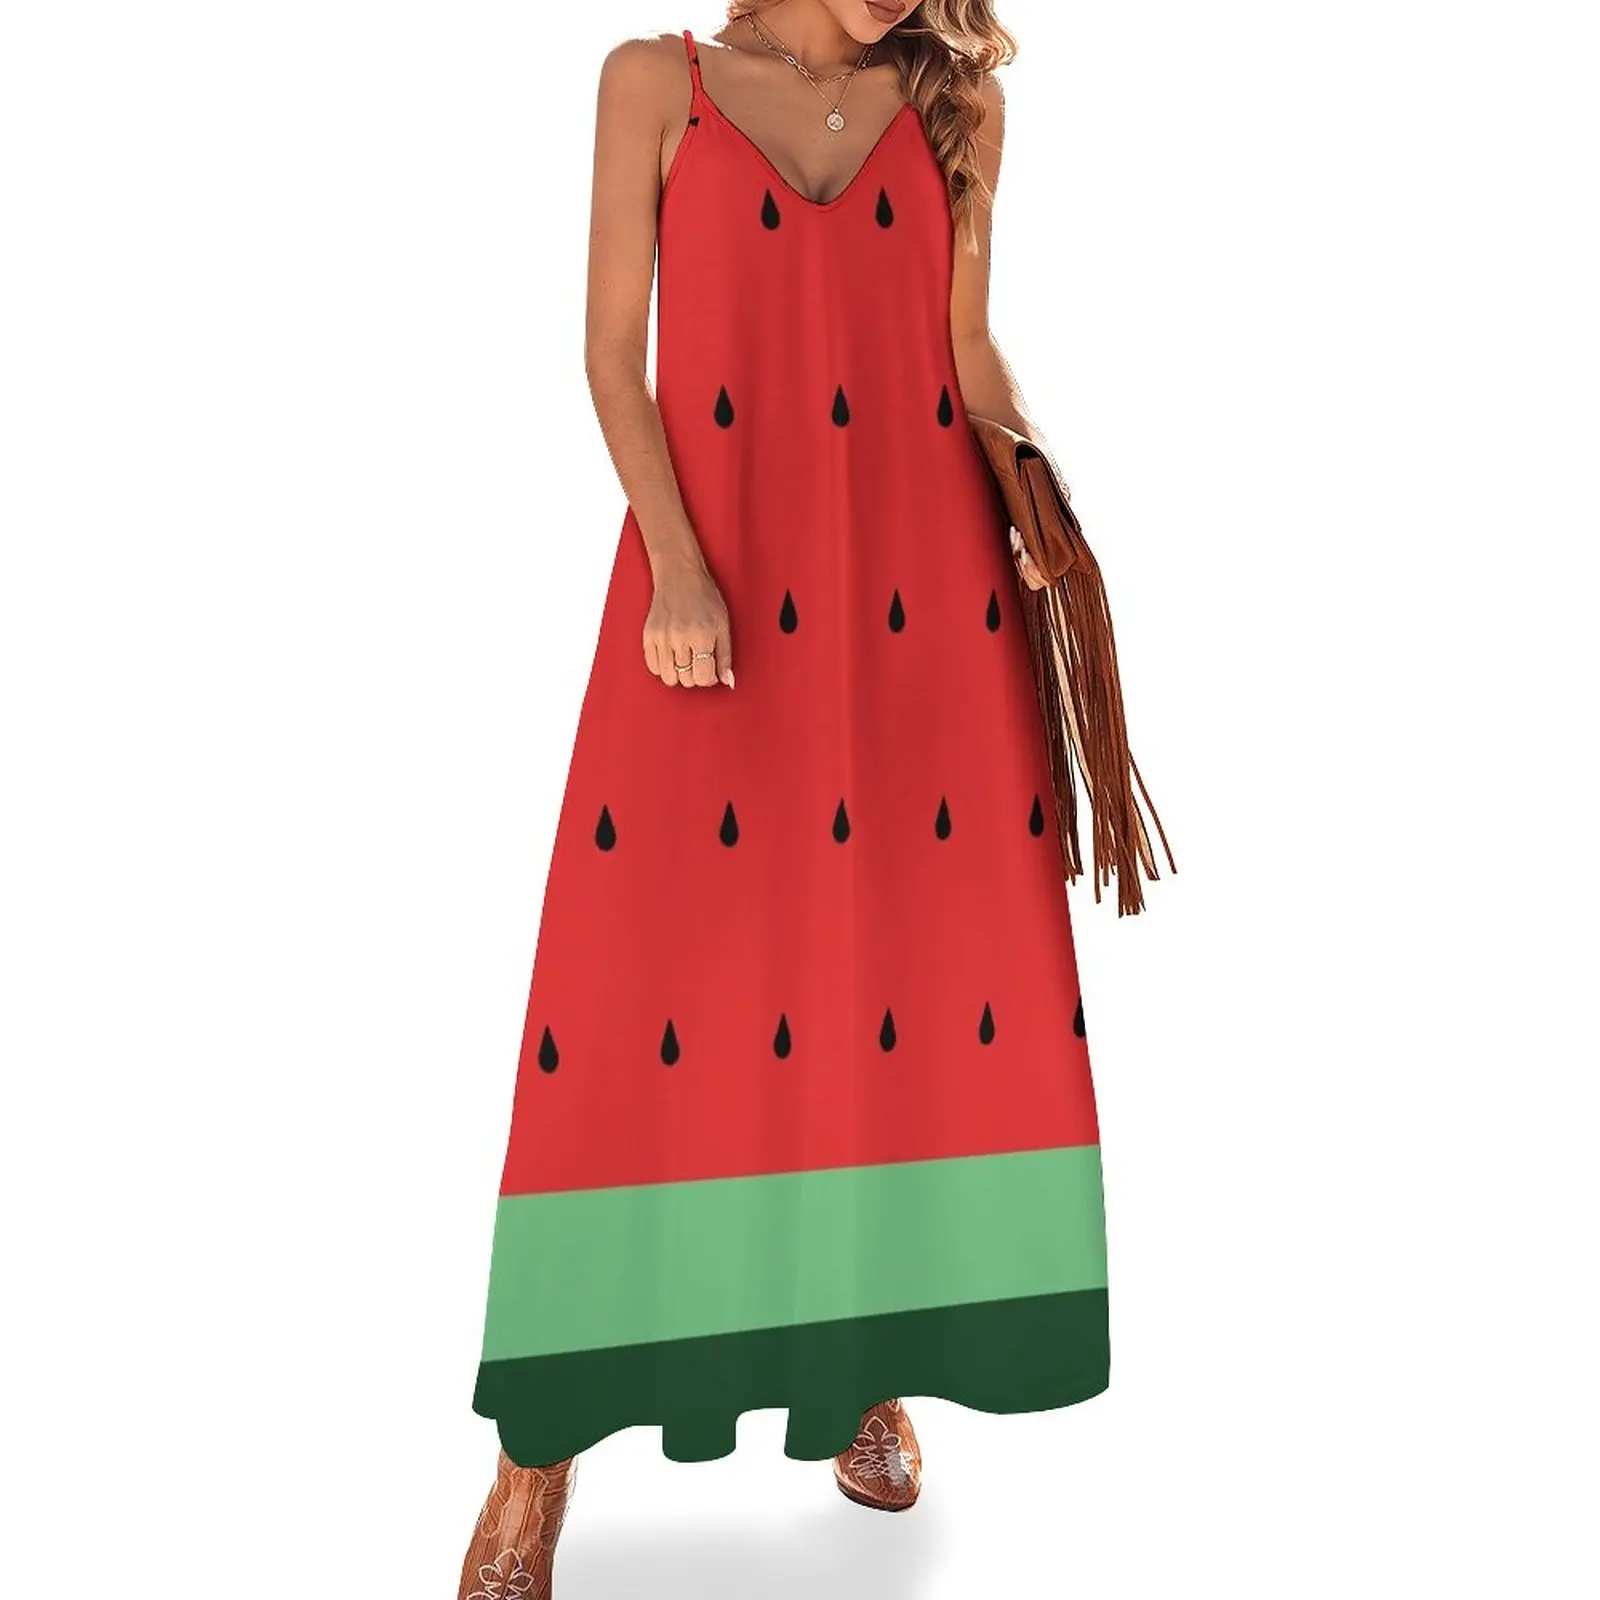 

Watermelon [Roufxis-Rb] Sleeveless Dress women formal occasion dresses ladies dresses for special occasions